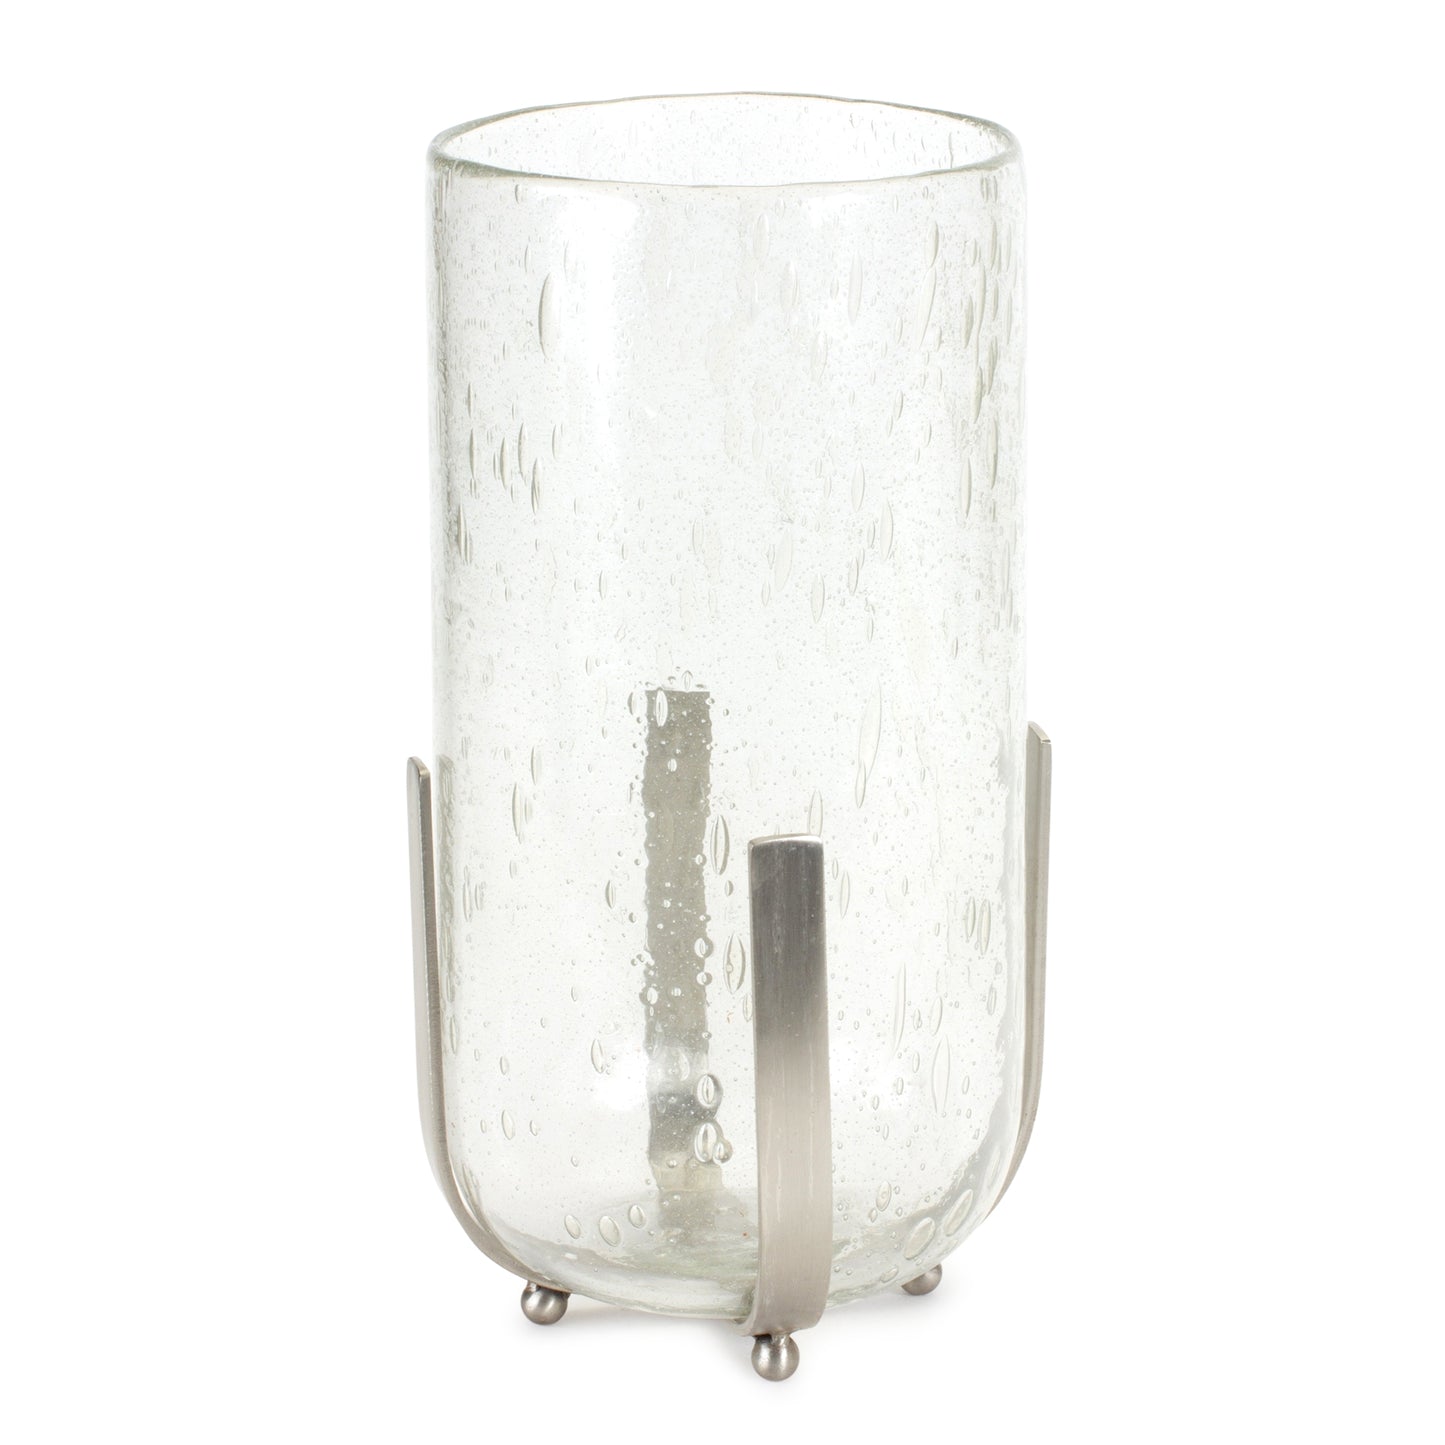 Candle Holder or Vase 6.25"D x 12.5"H Iron/Glass